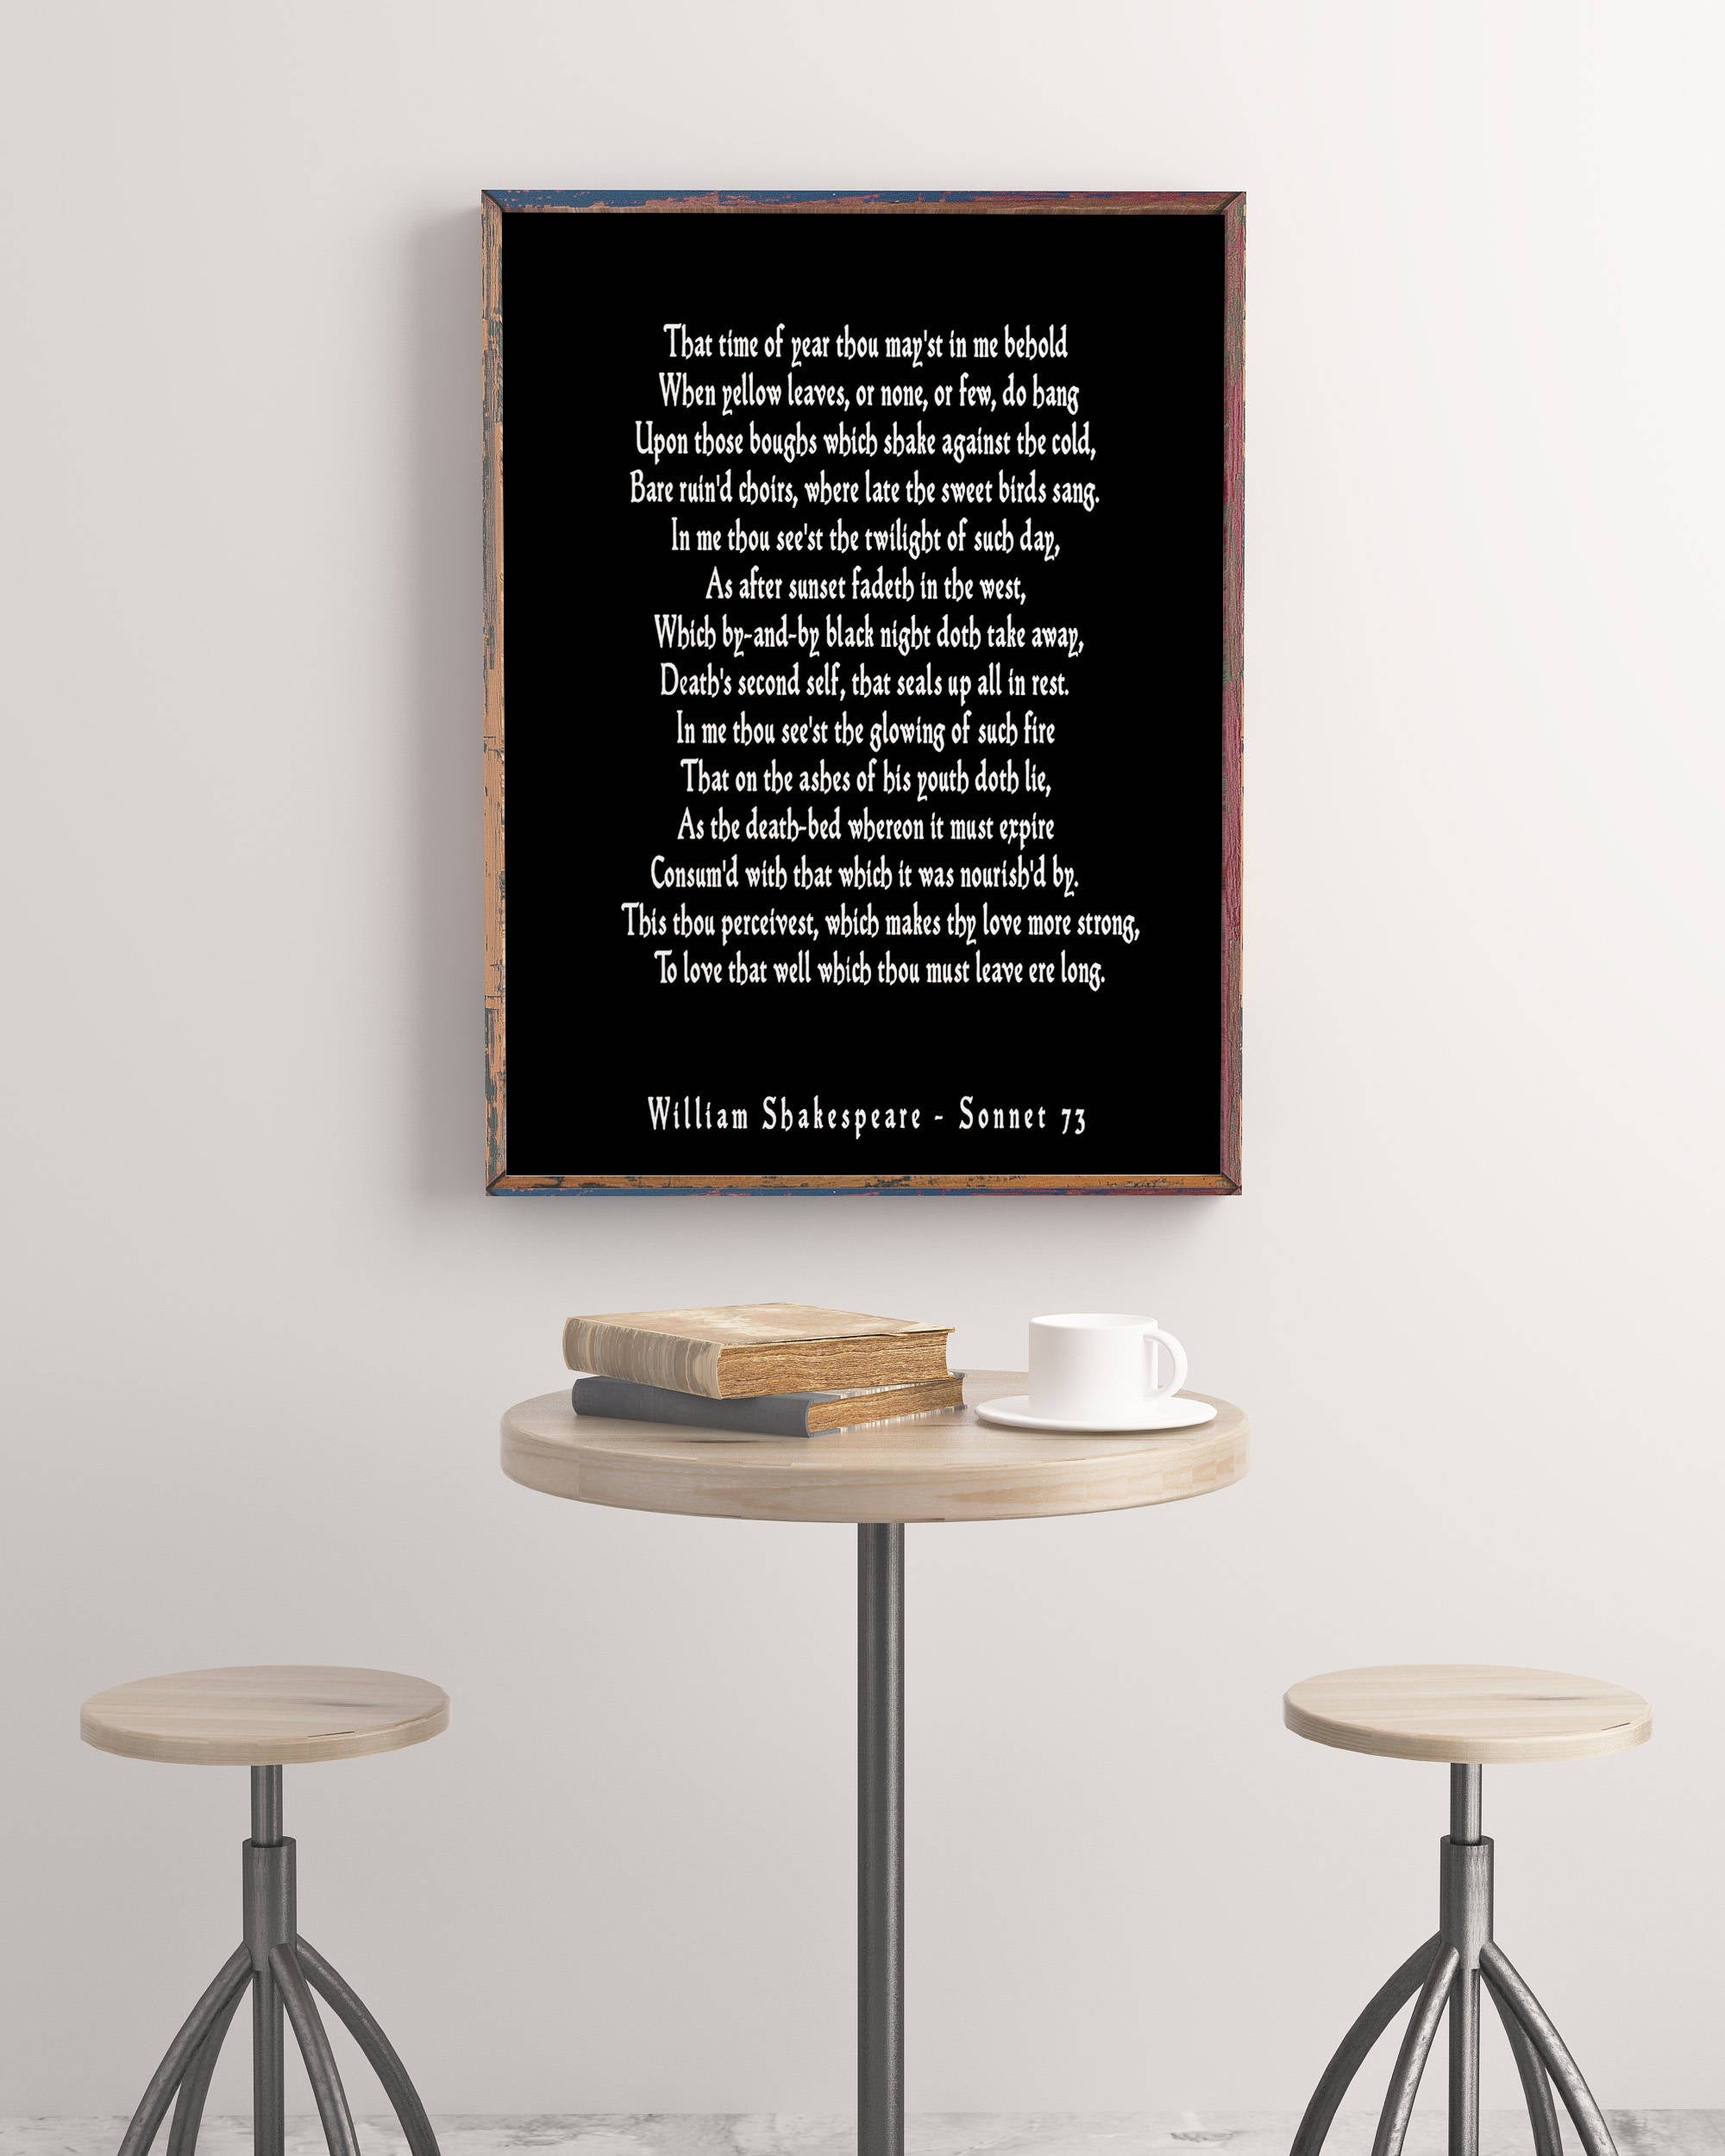 Sonnet 73 Shakespeare Love Poem, That Time Of Year Thou Mayst In Me Behold Shakespeare Wall Art for Bedroom Decor, Love Poetry Art Unframed - BookQuoteDecor